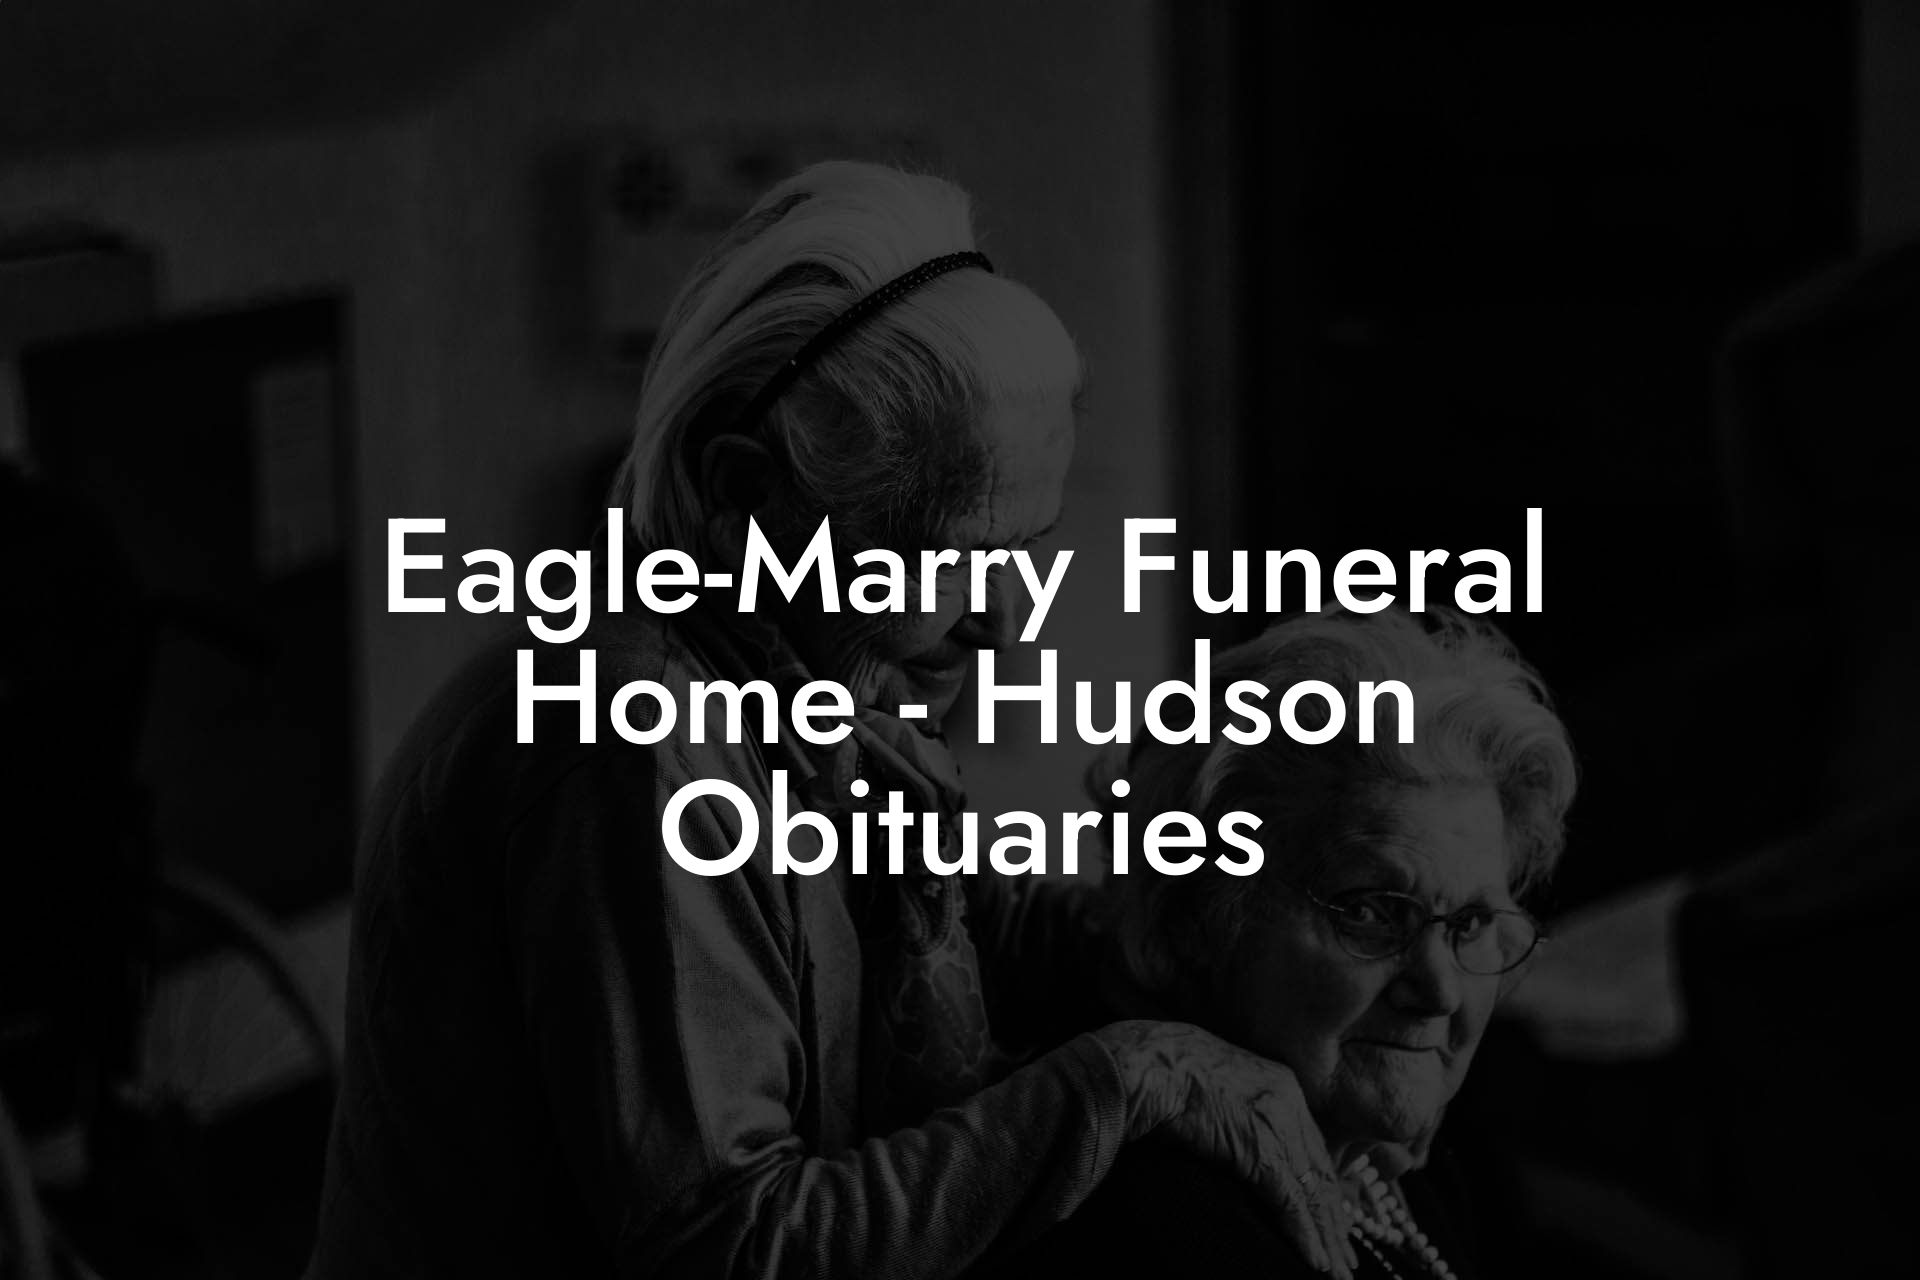 Eagle-Marry Funeral Home - Hudson Obituaries